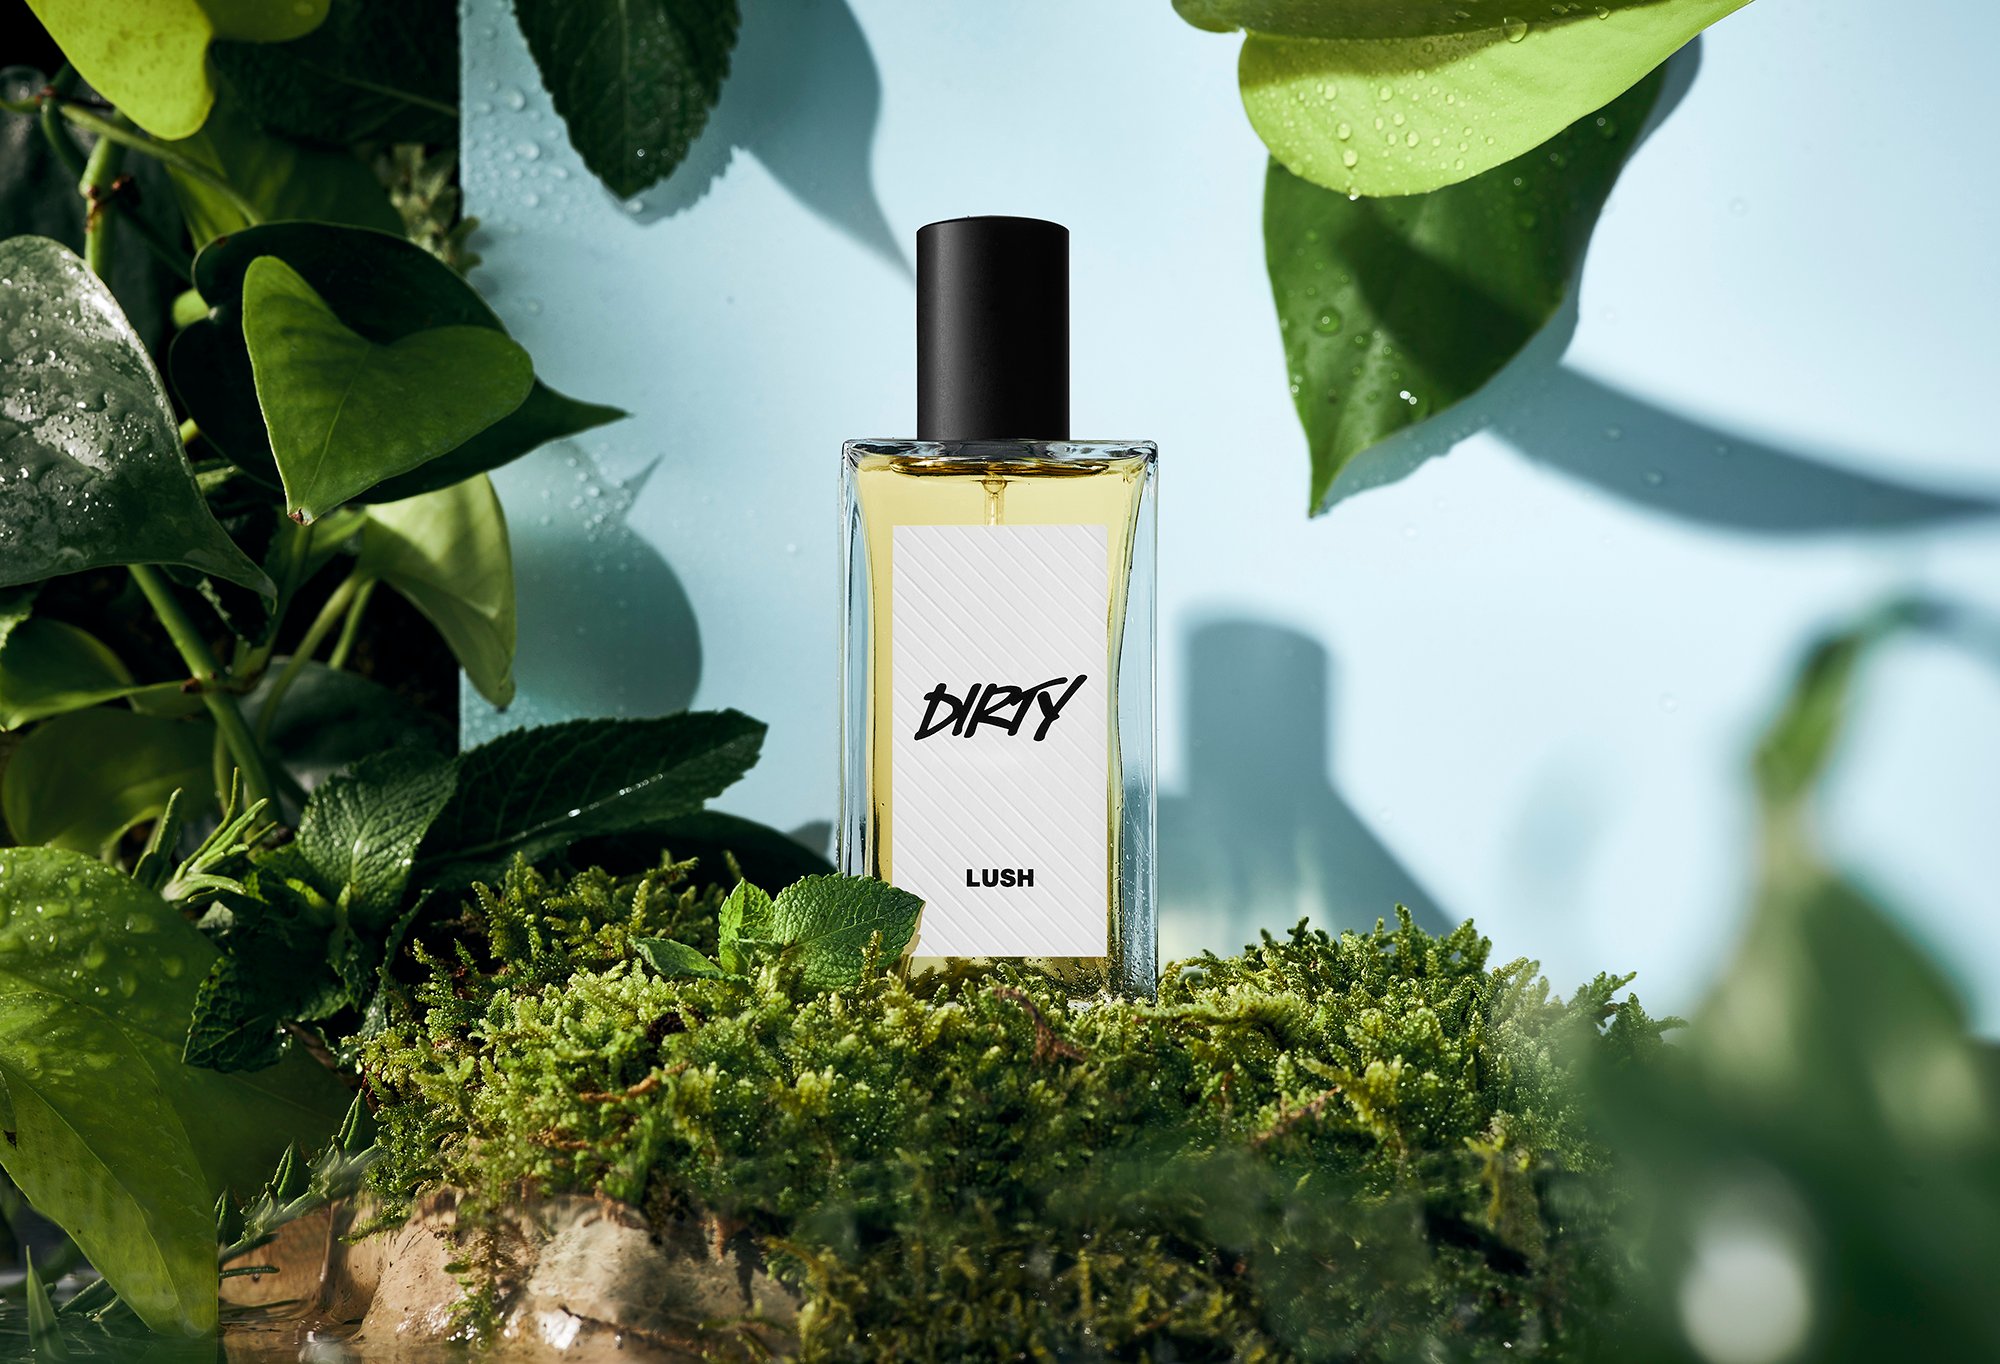 Dirty perfume is placed on green grass. Green leaves with water droplets are draped in the corners on a blue backdrop.